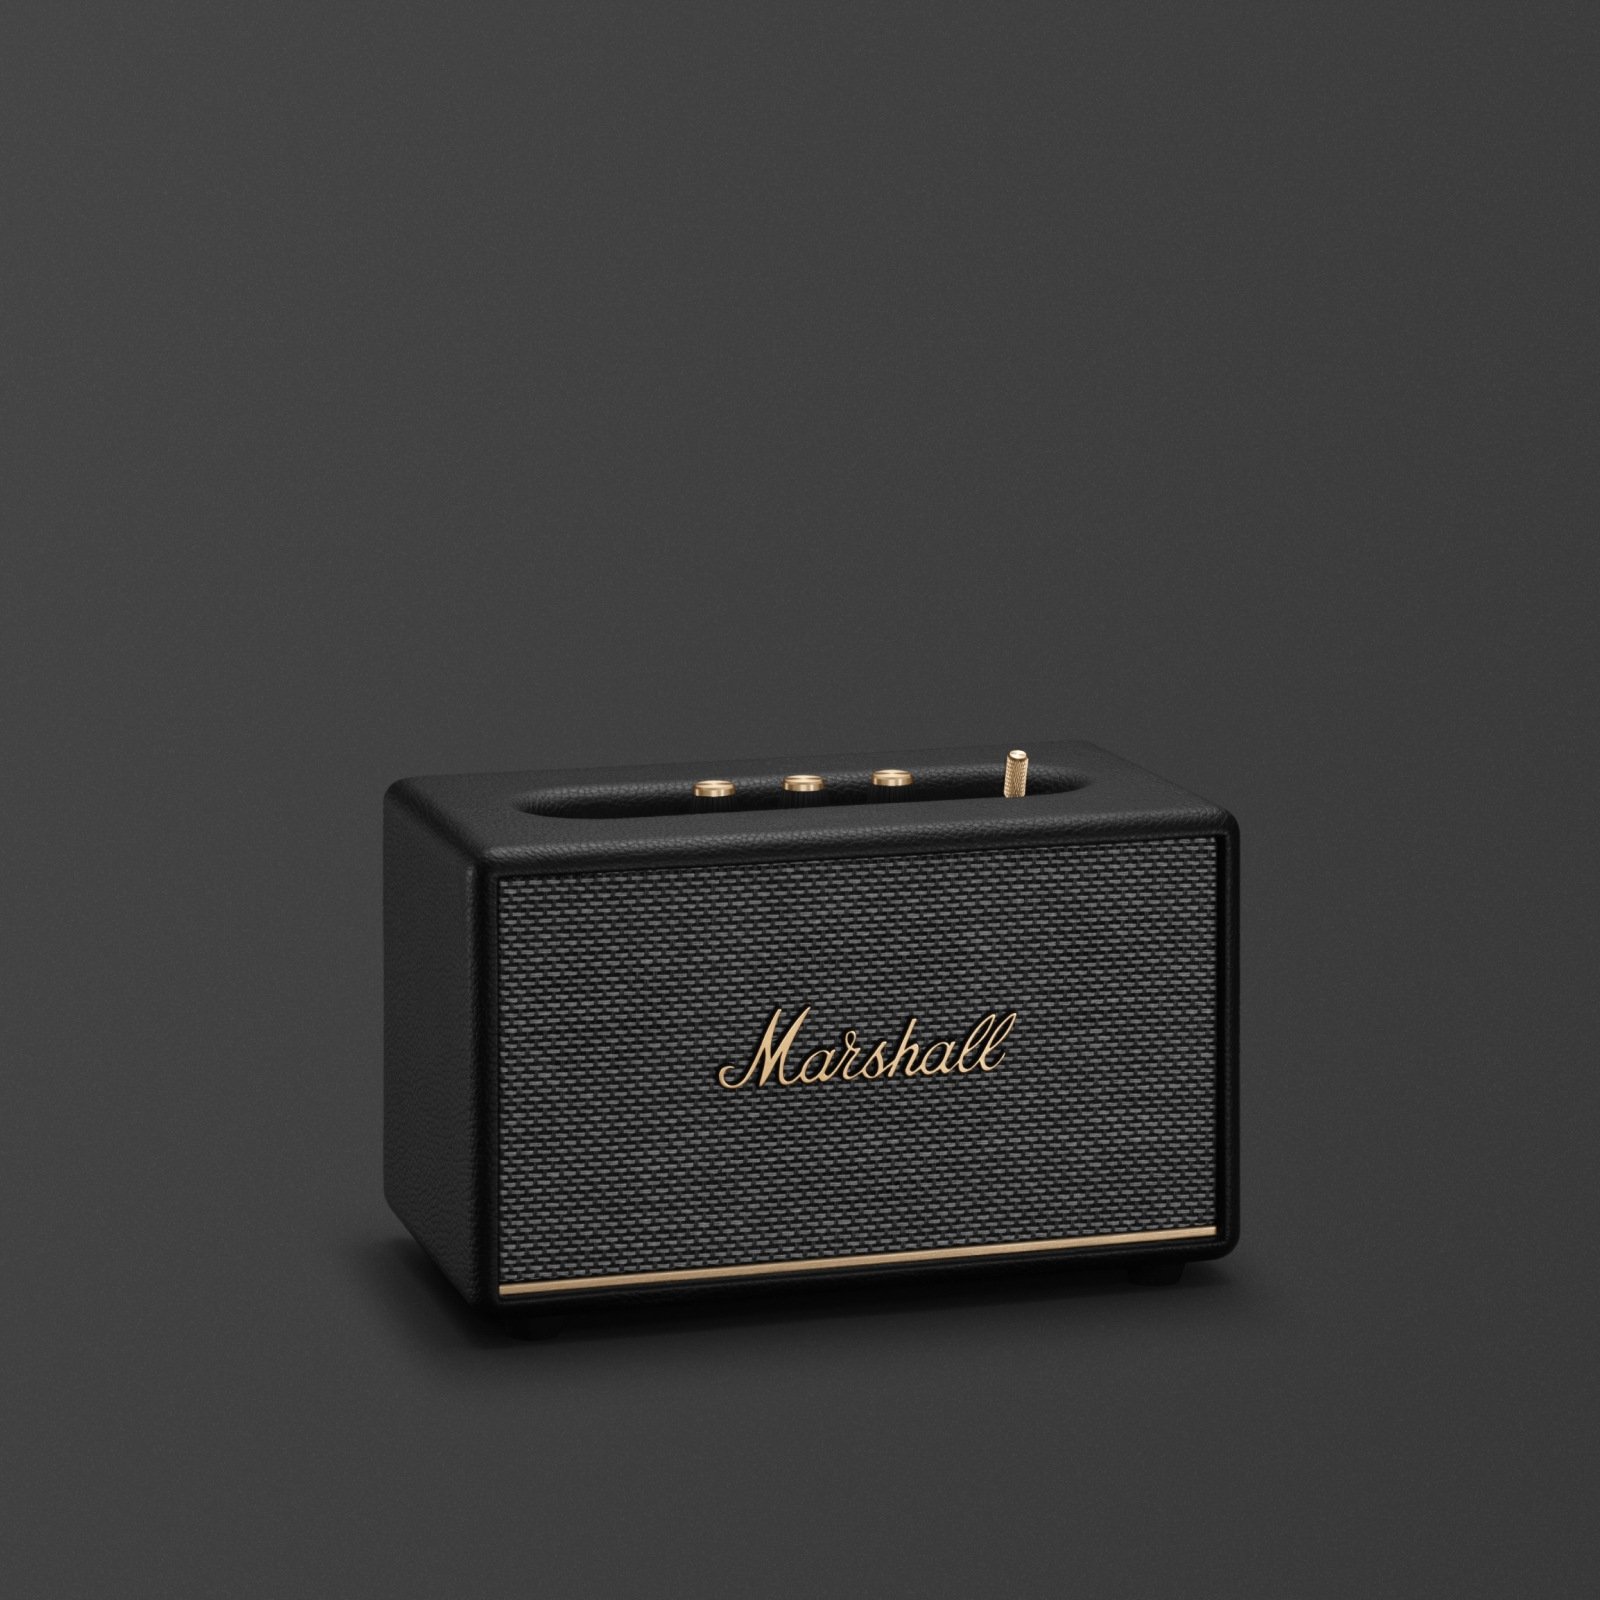 Marshall Acton III Bluetooth speaker in black and gold.